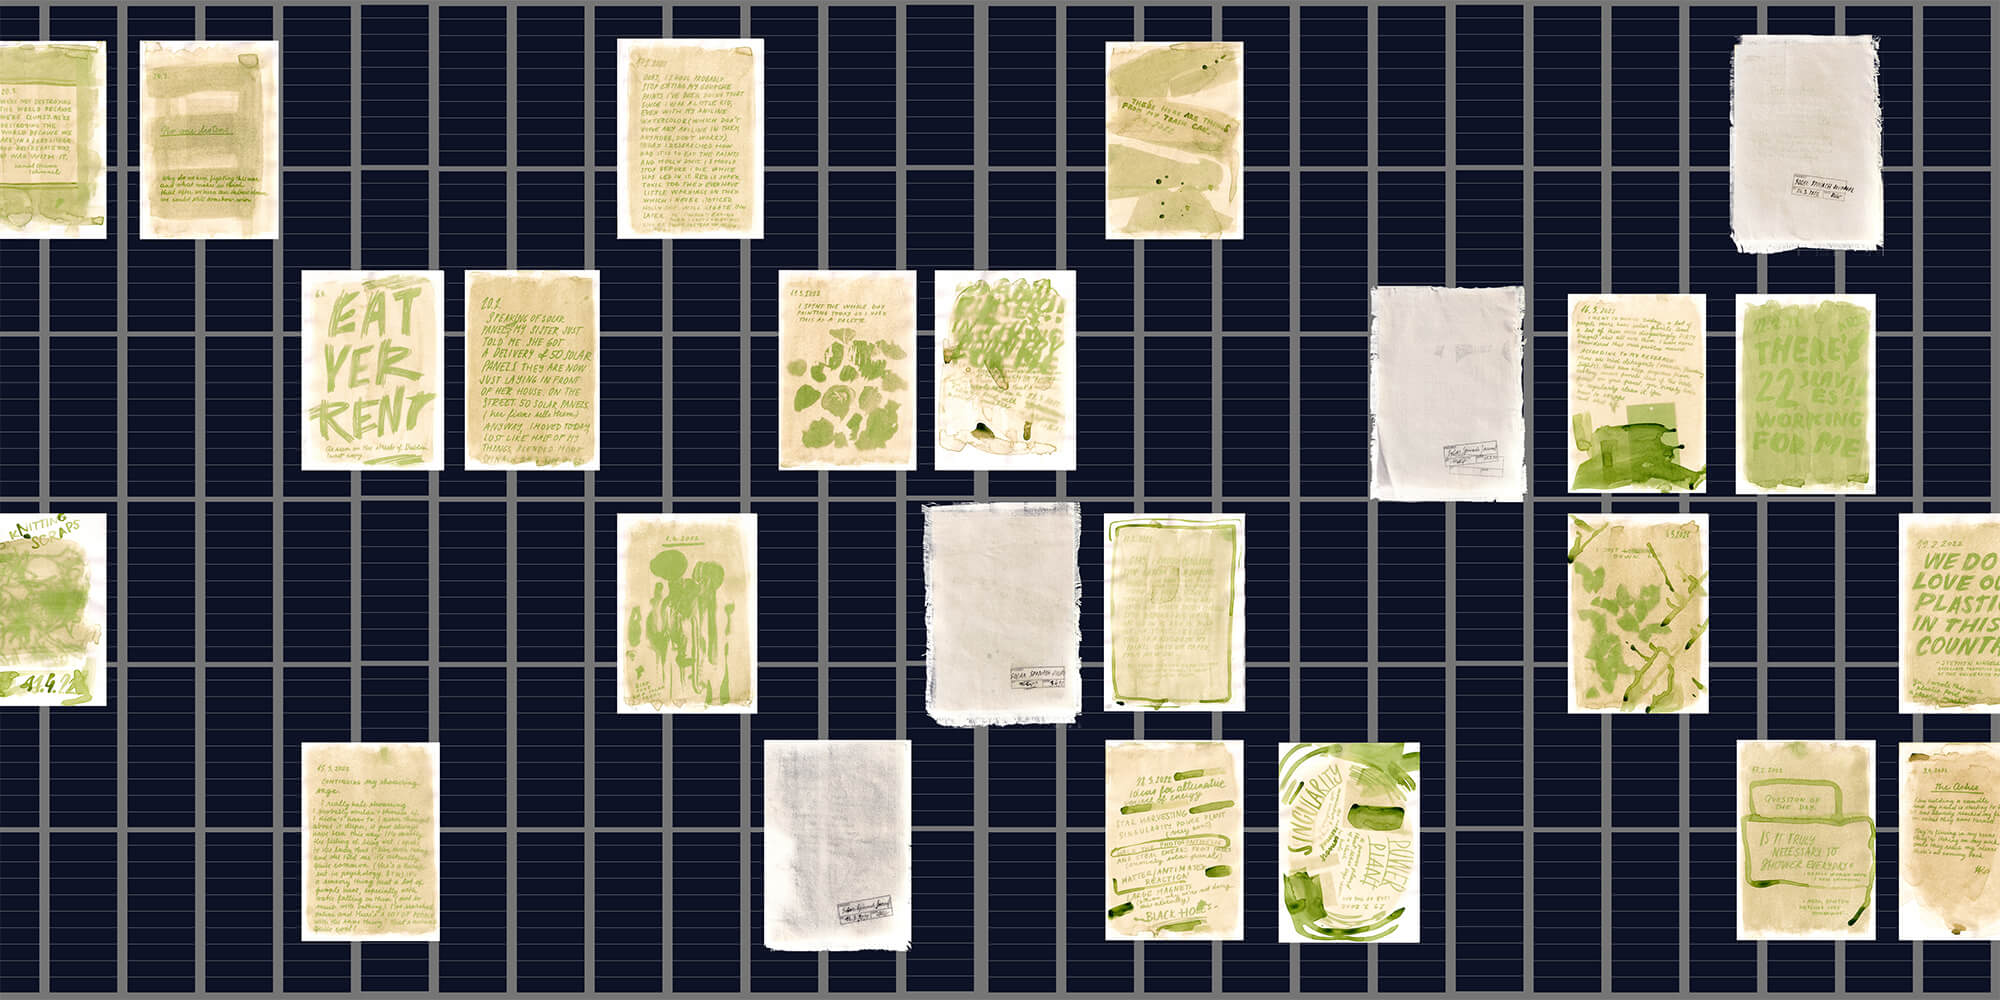 The Solar Spinach Journal